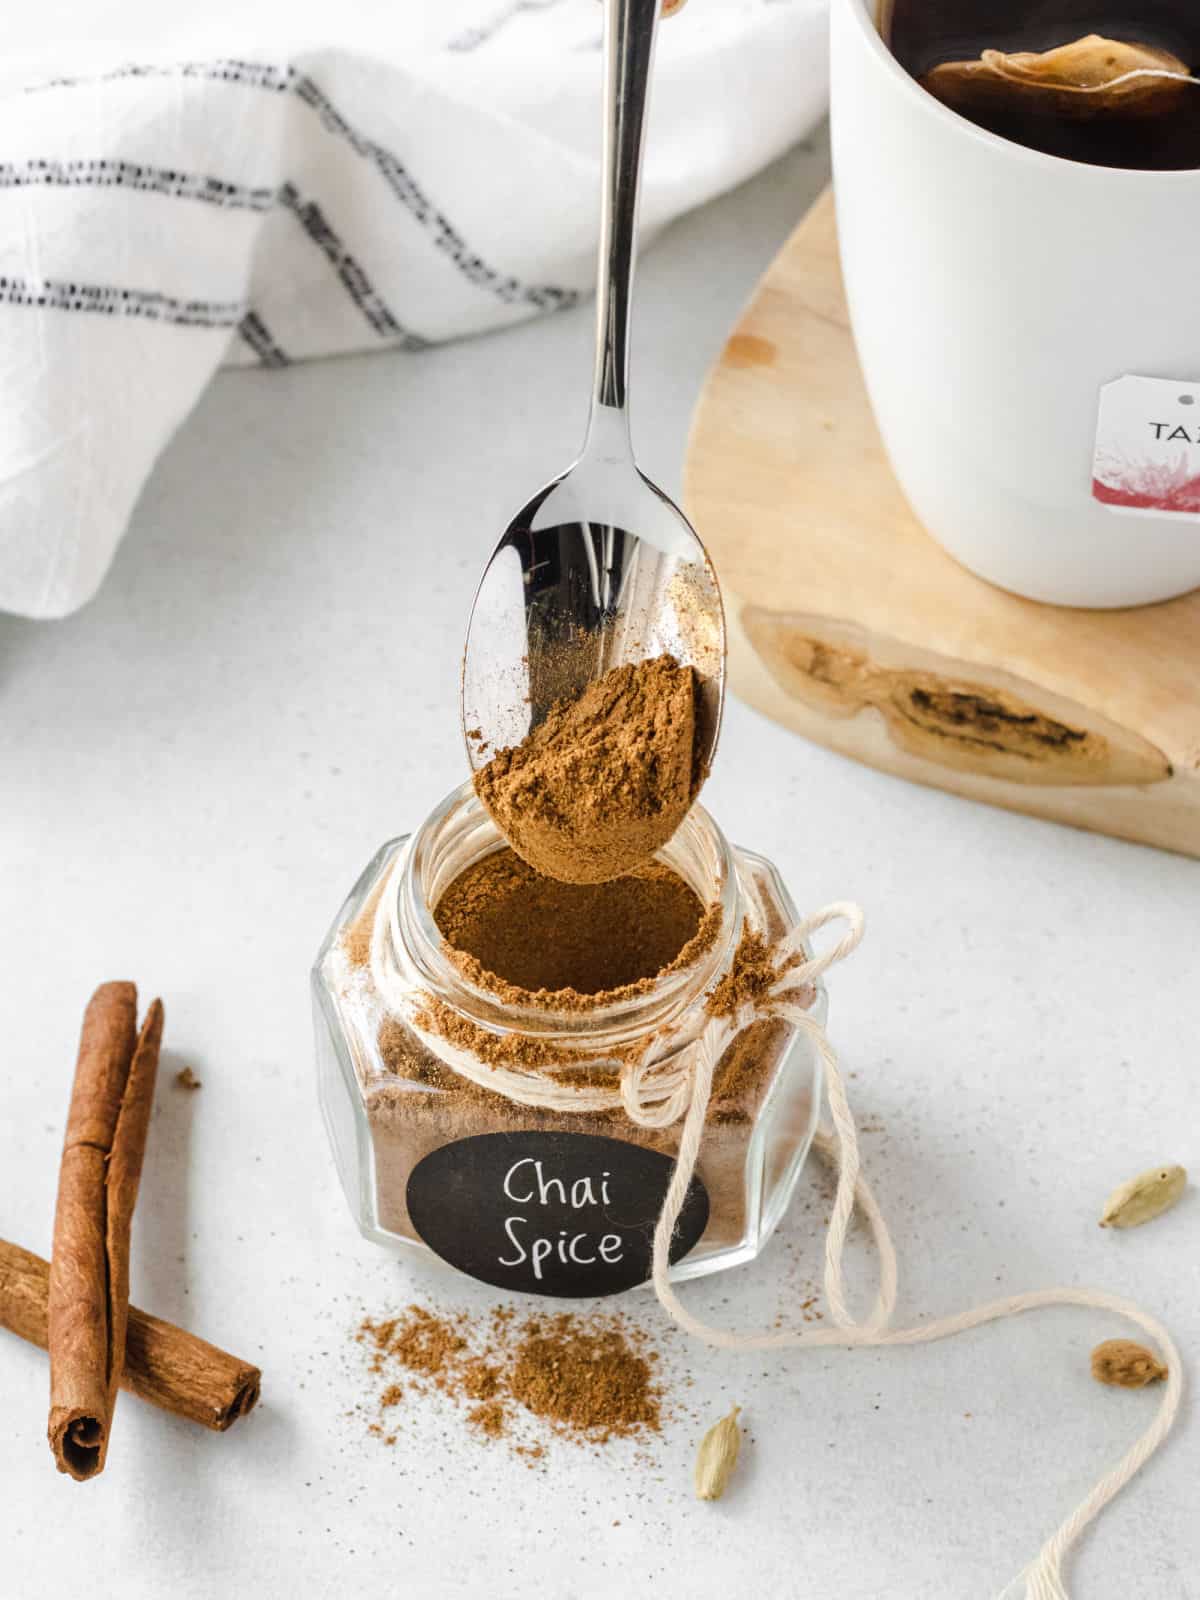 Chai spice in a jar being spooned out.